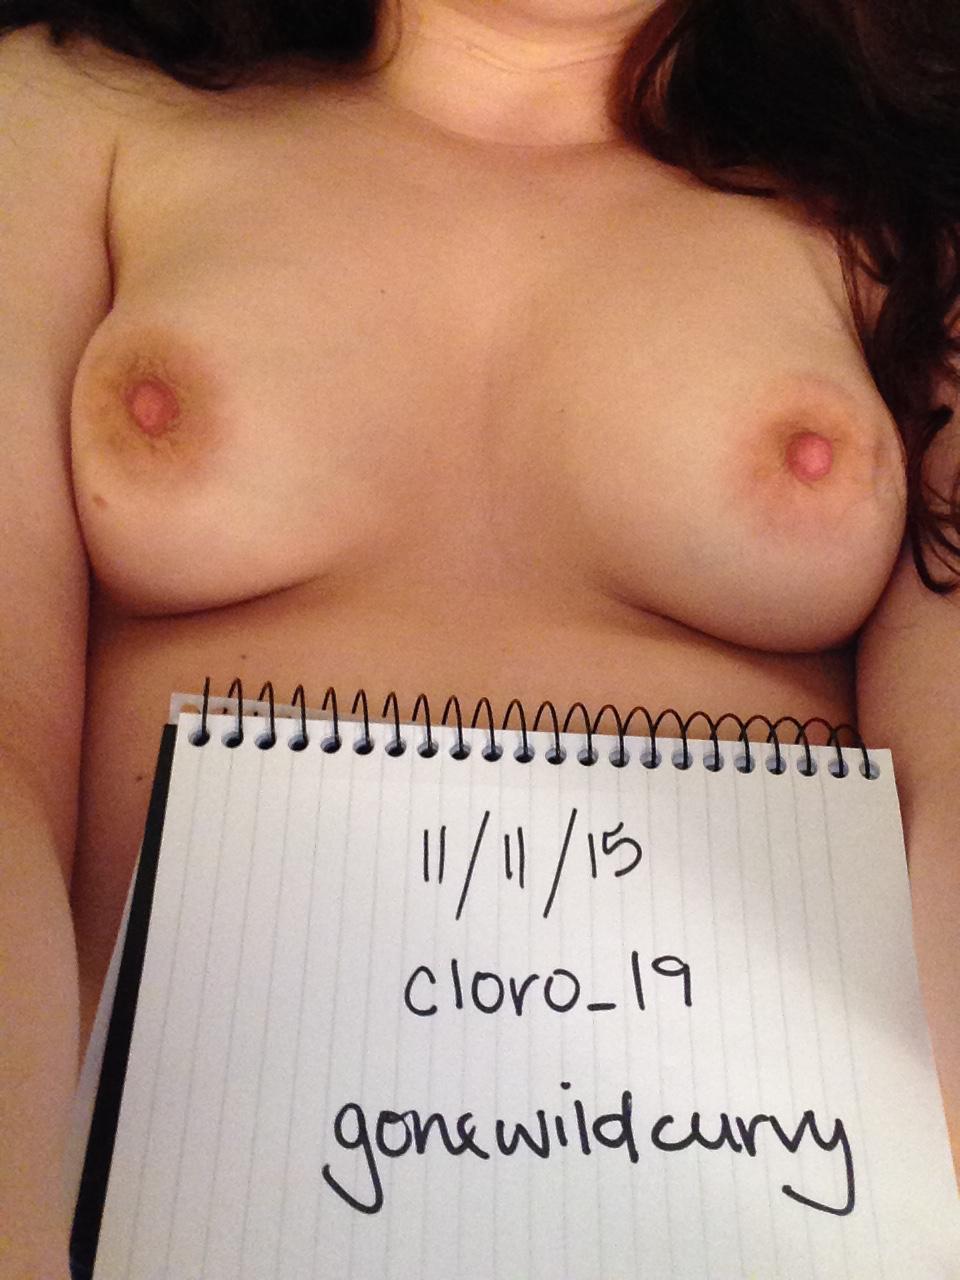 Verification! Can't wait to post more ;)